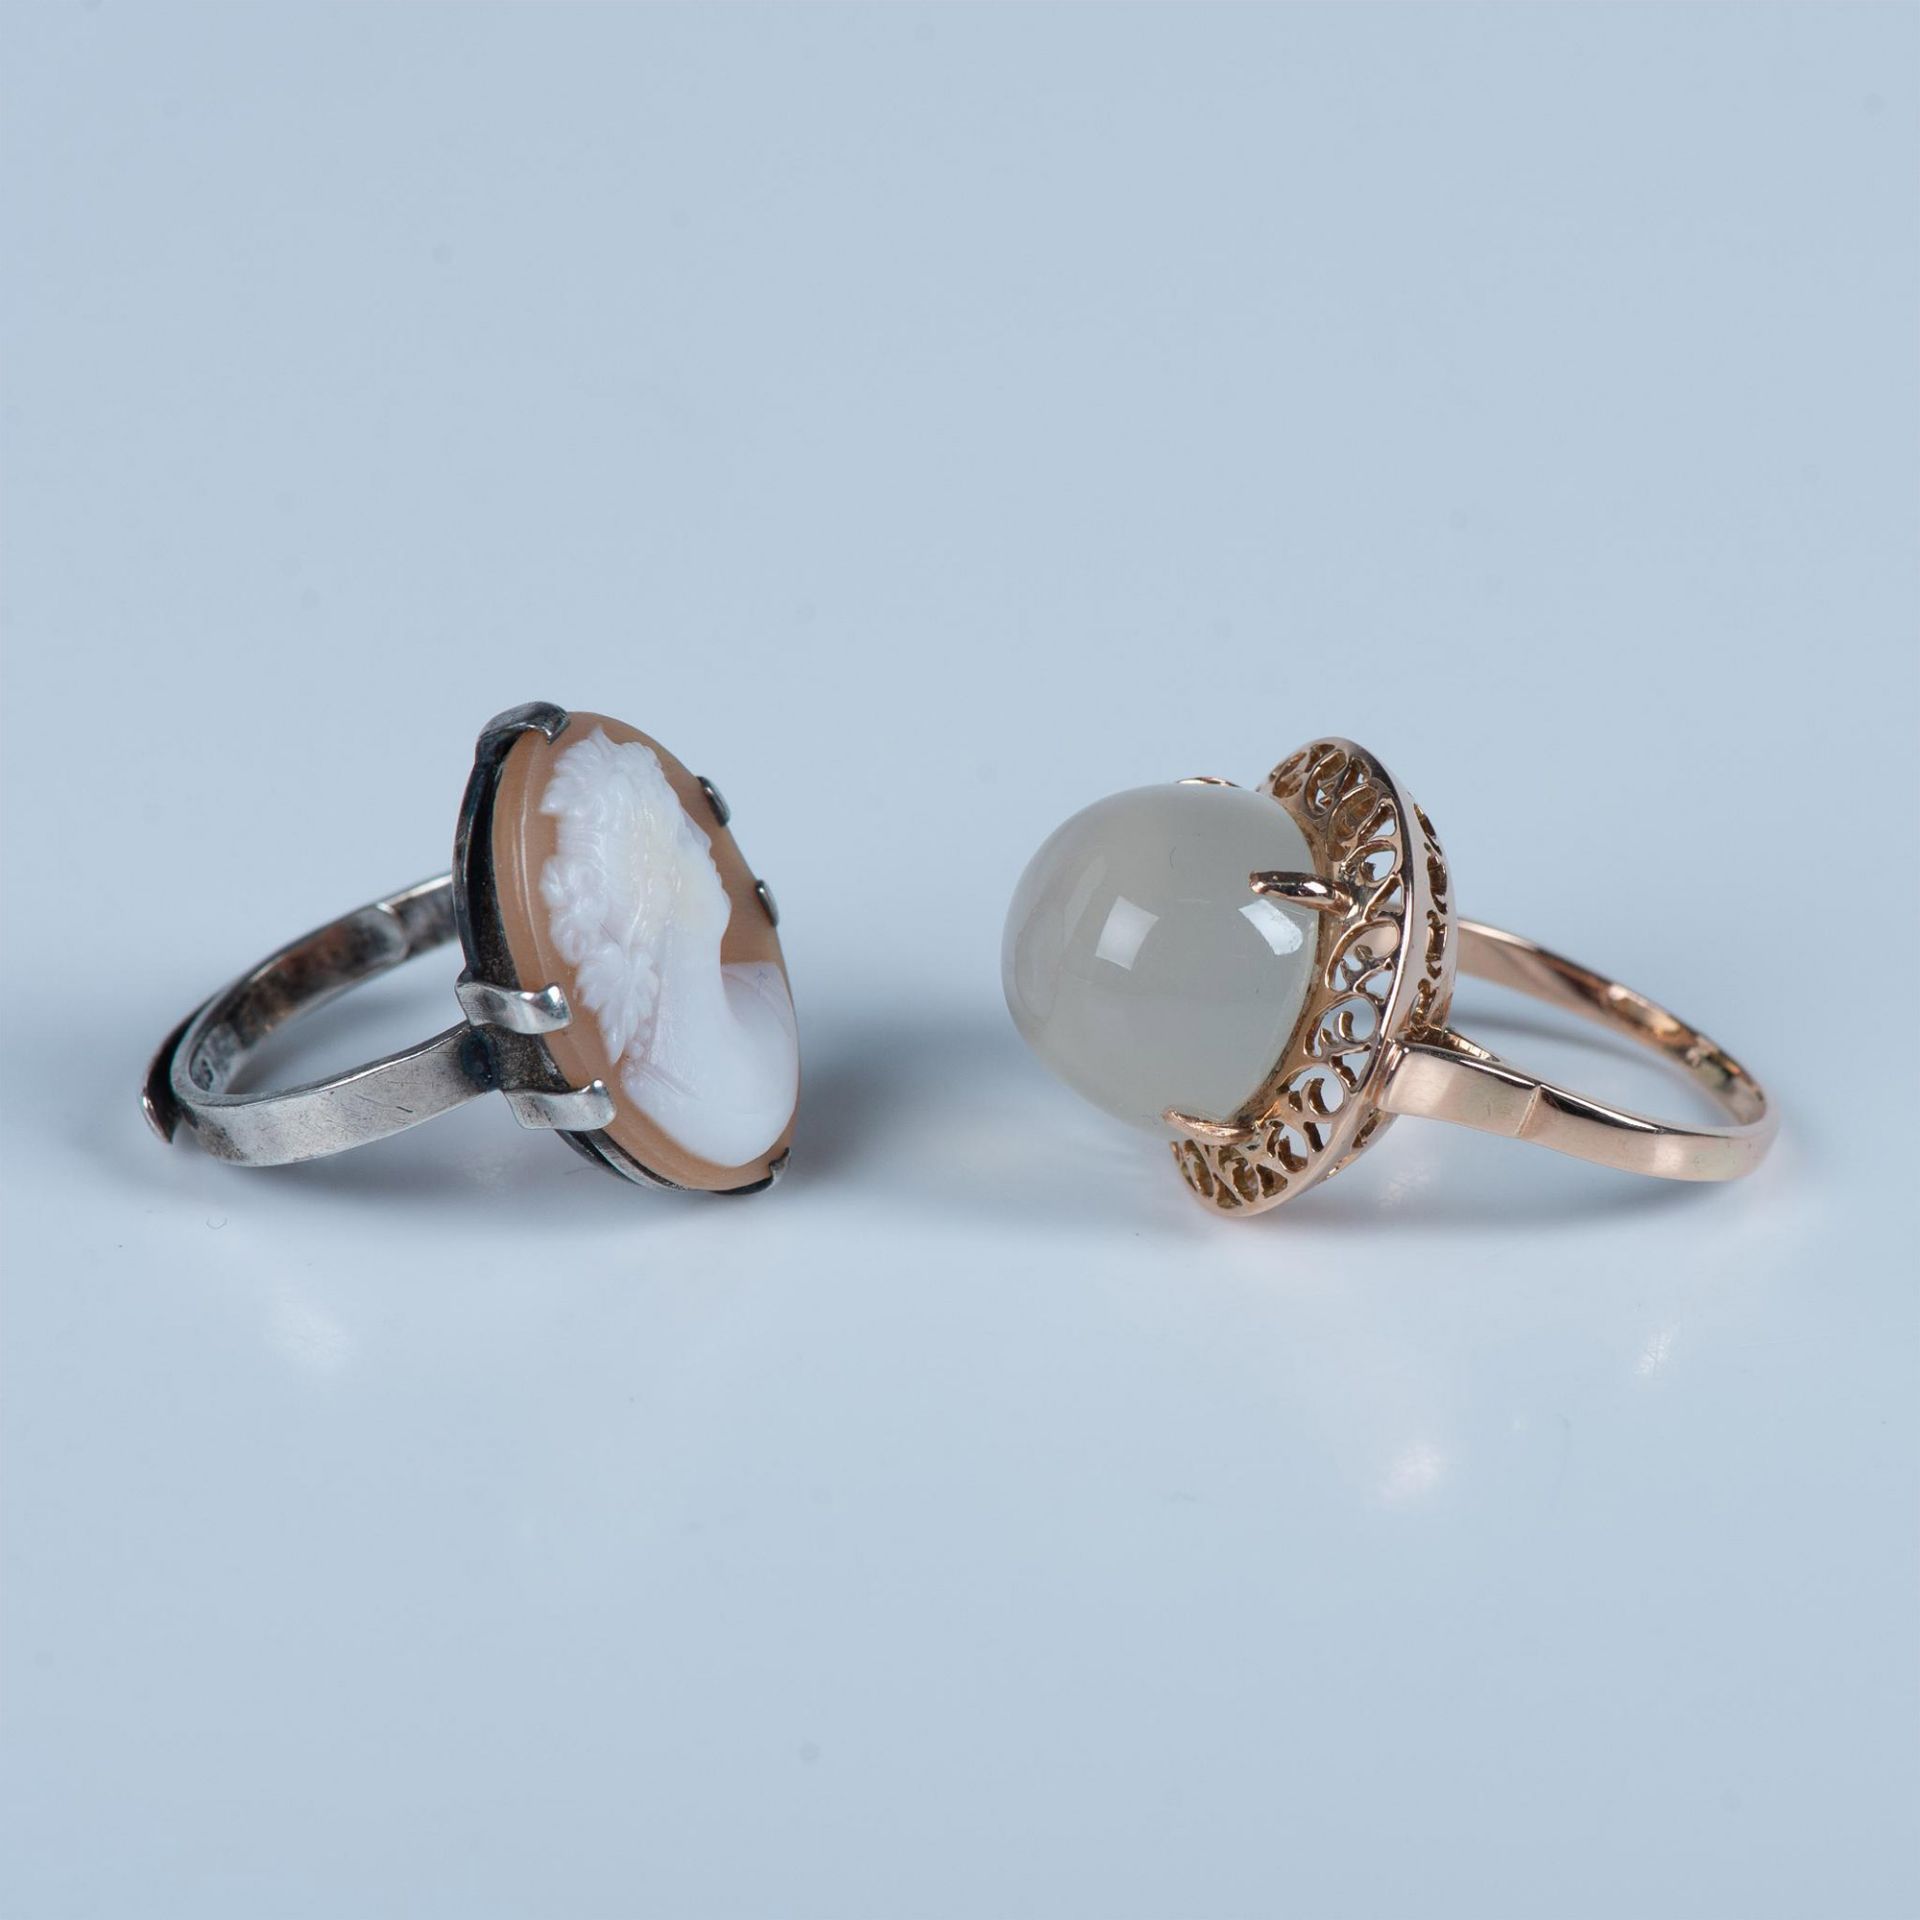 2pc Rings Sterling Cameo and Gold Tone Moonstone - Image 2 of 7